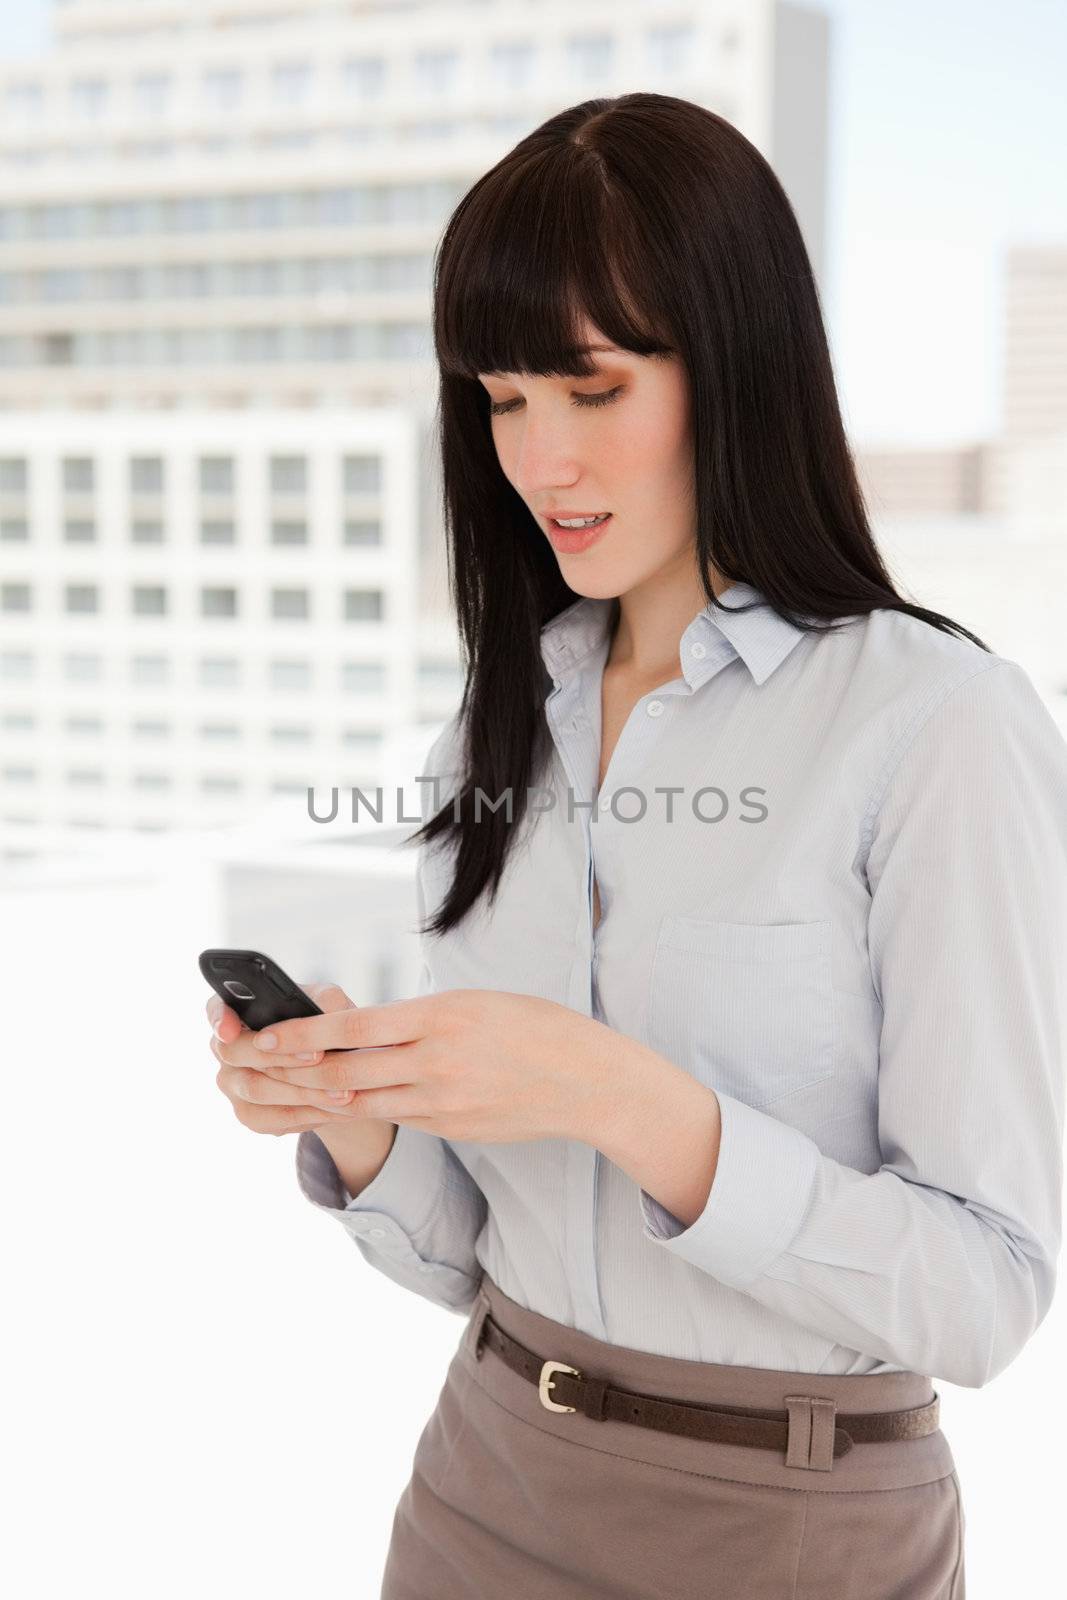 A woman using her phone to send a text message at work